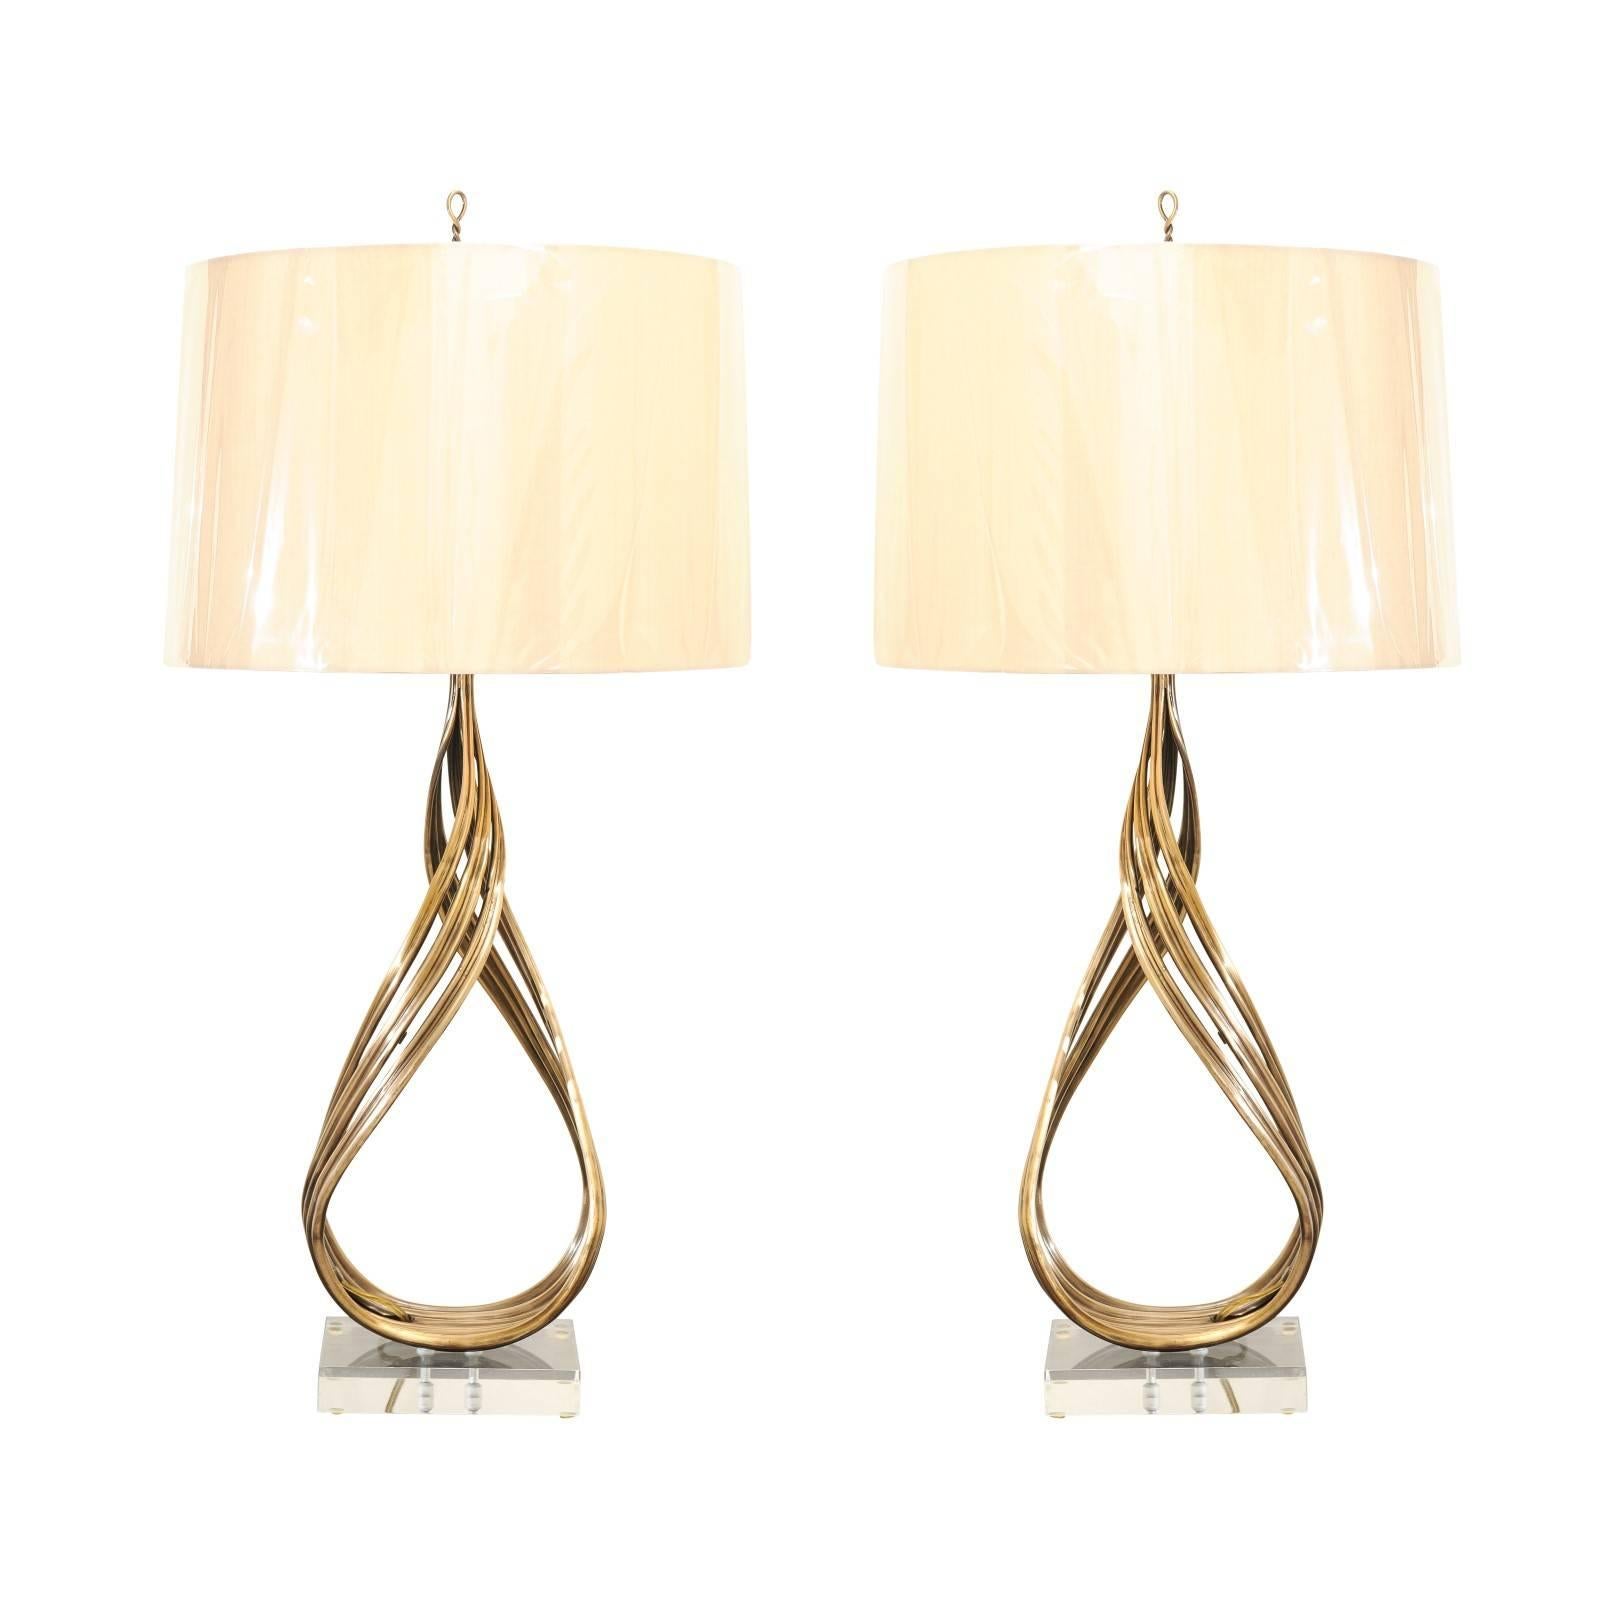 Stellar Restored Pair of Iconic Brass Flame Lamps by Chapman, circa 1993 For Sale